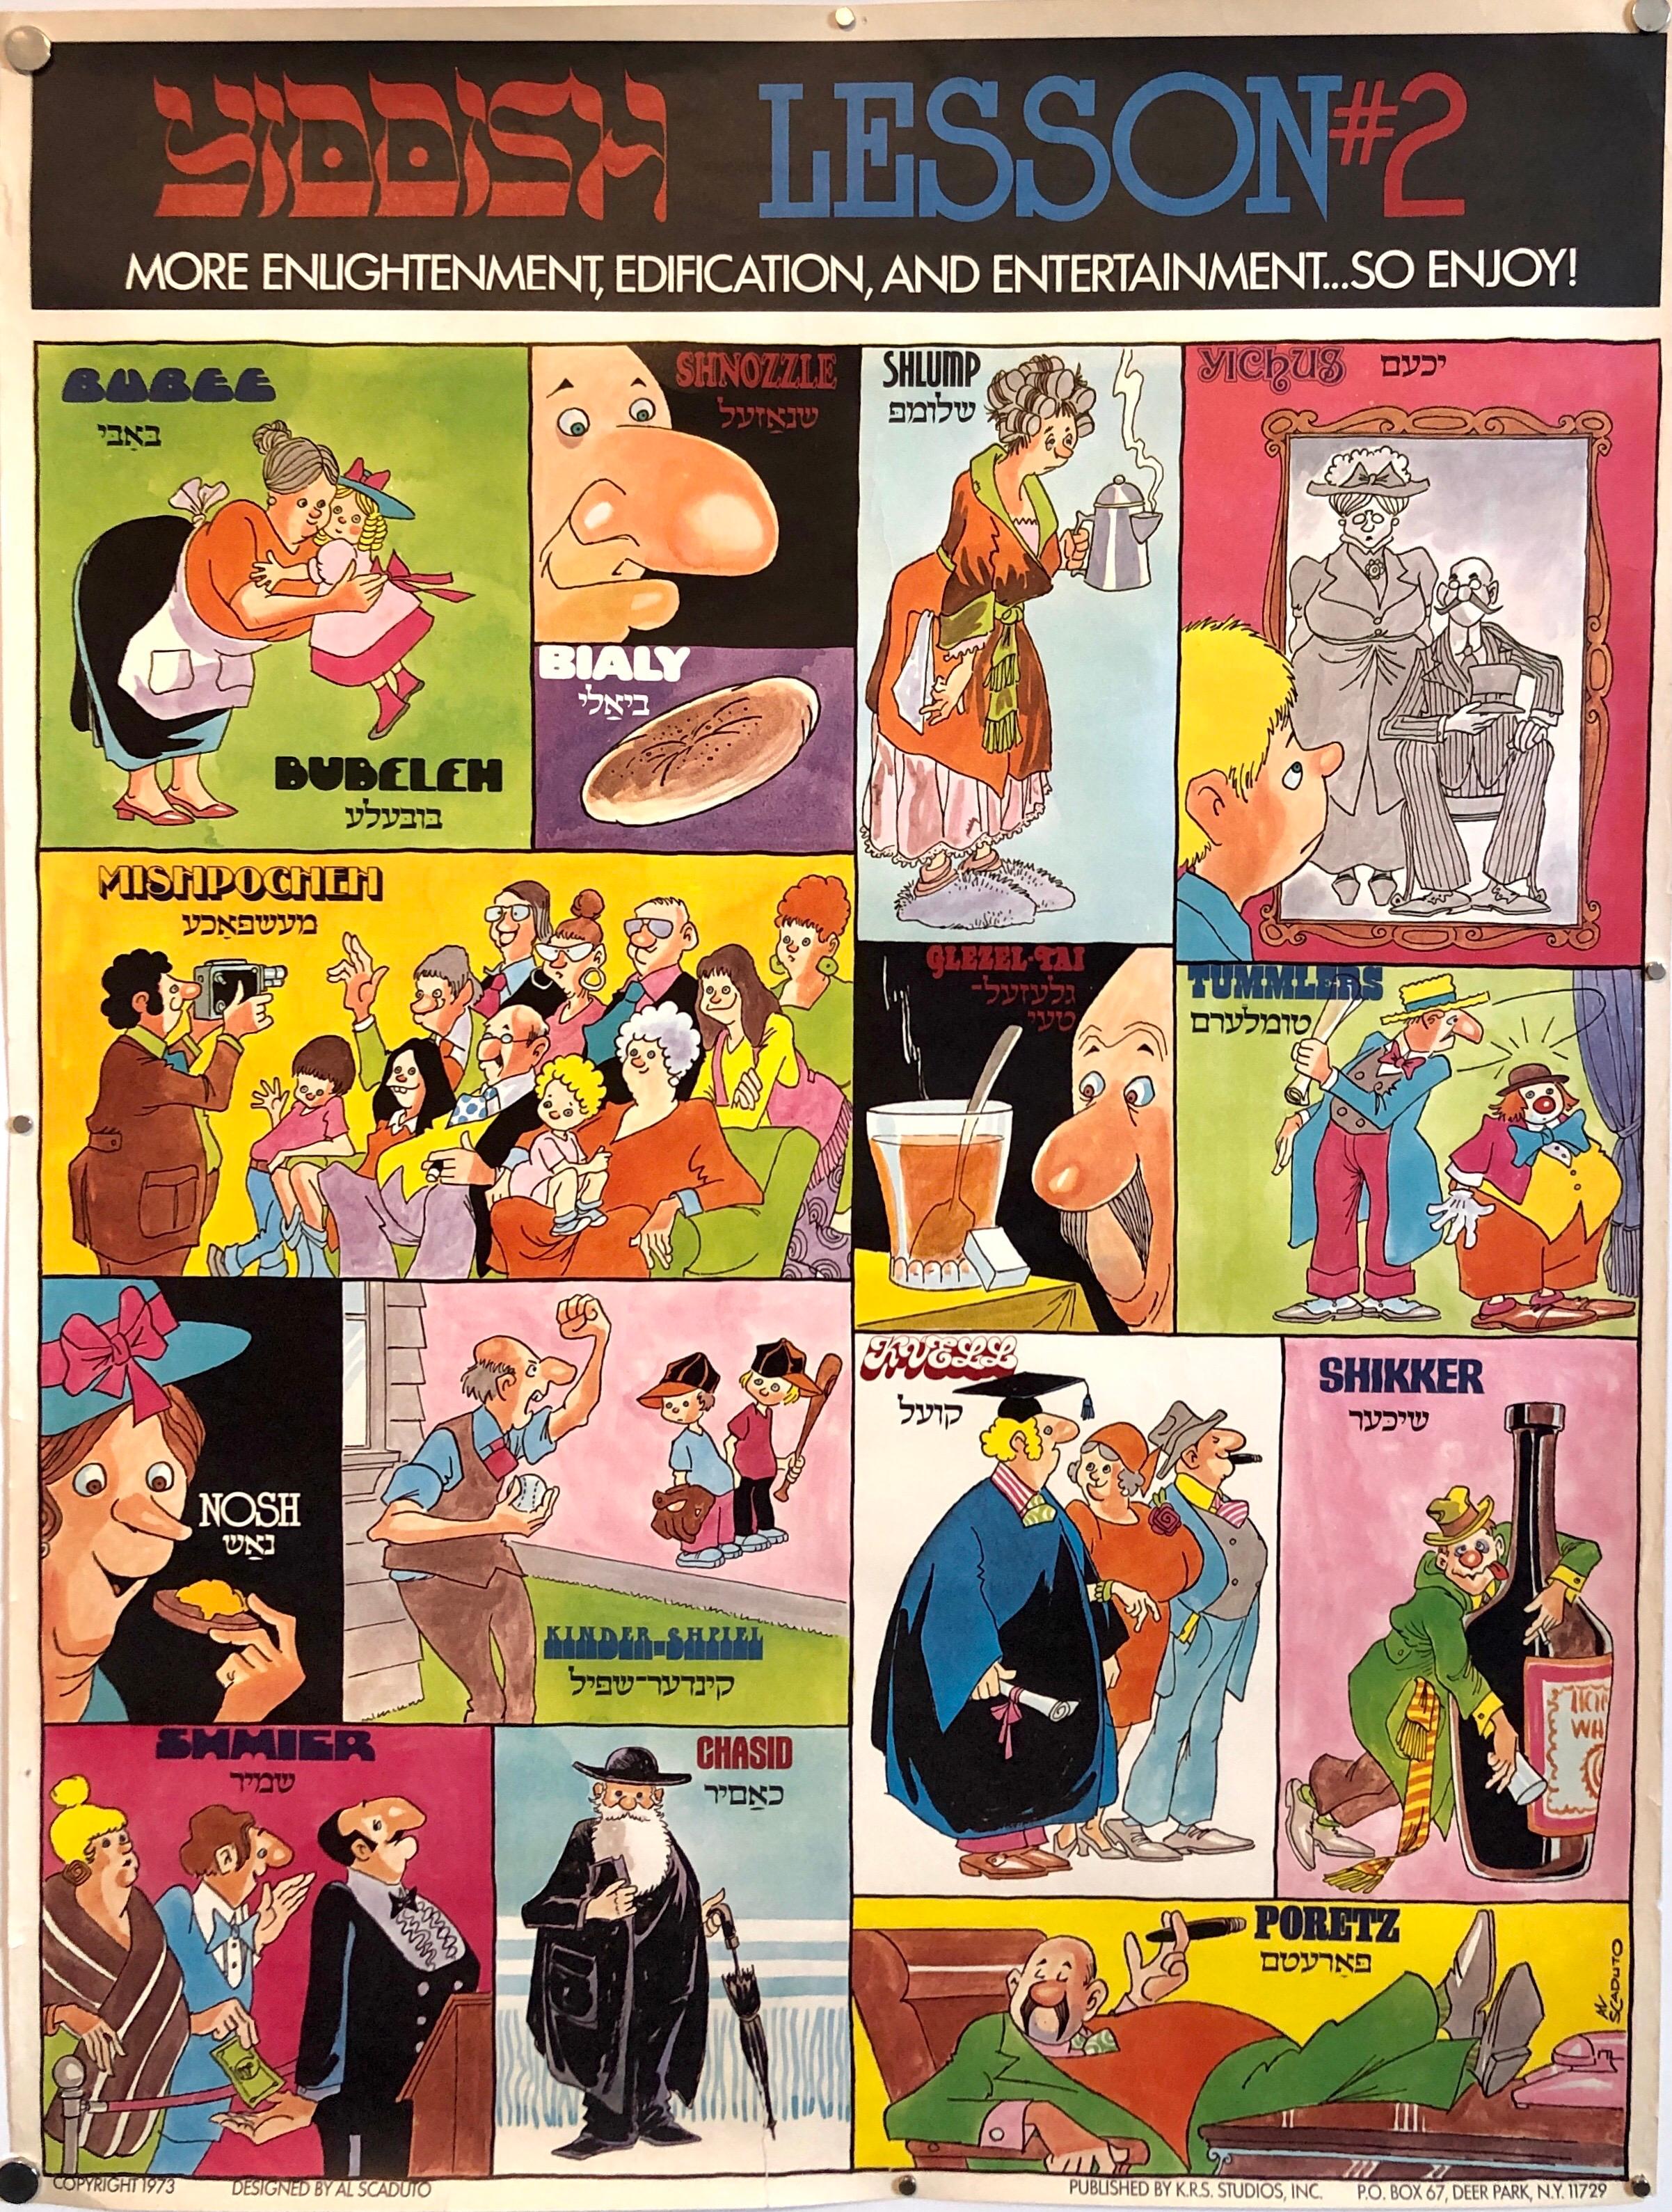 the yiddish lesson poster